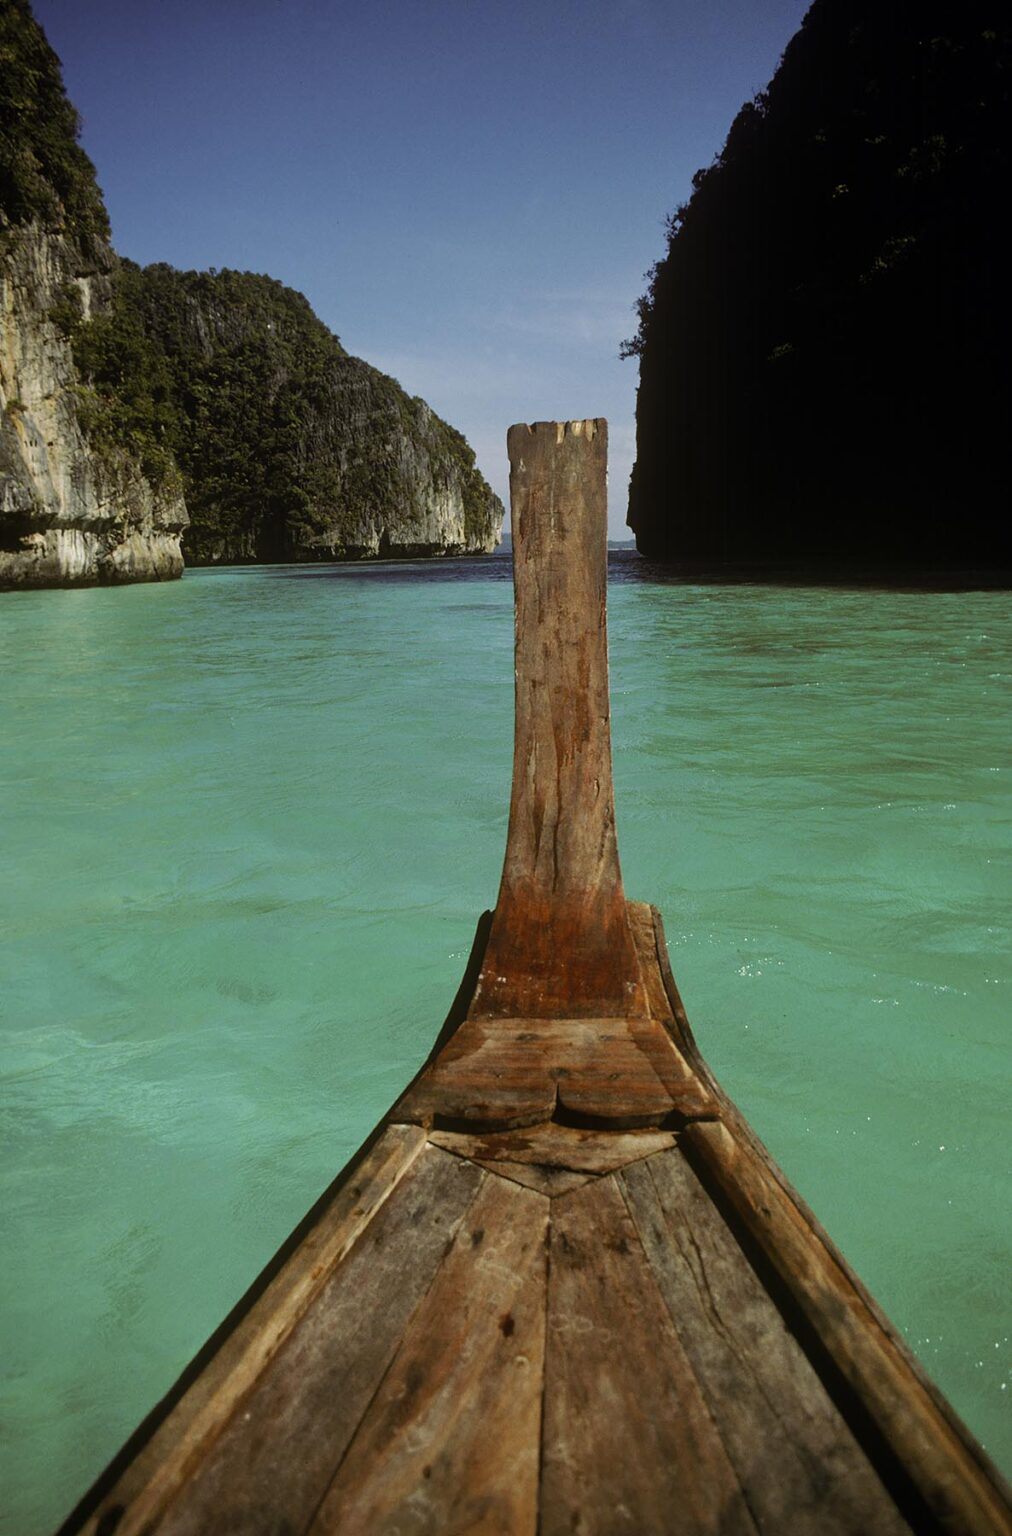 The island of KOH PHI PHI is located in the ANDAMAN SEA off the coast of THAILAND and is a popular vacation destination